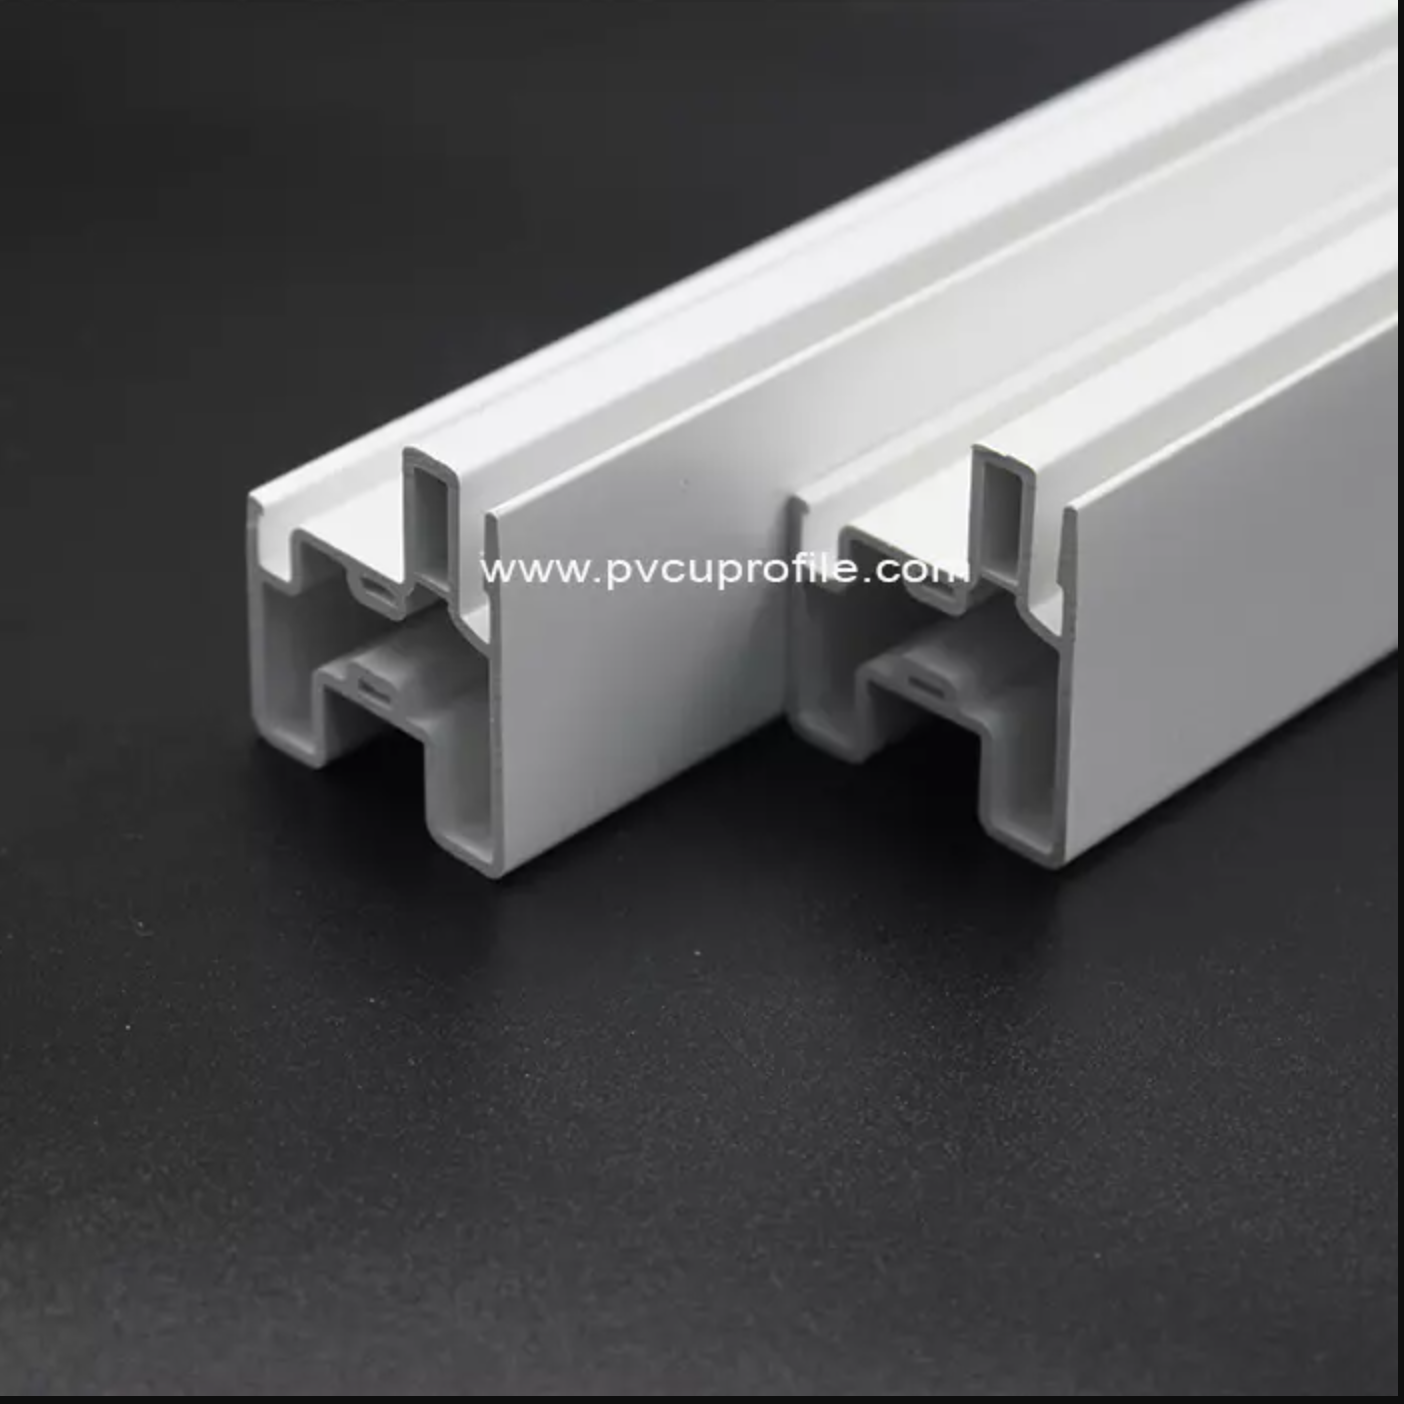 PVC-Extrusionsprofile (Vingly Extrusions)